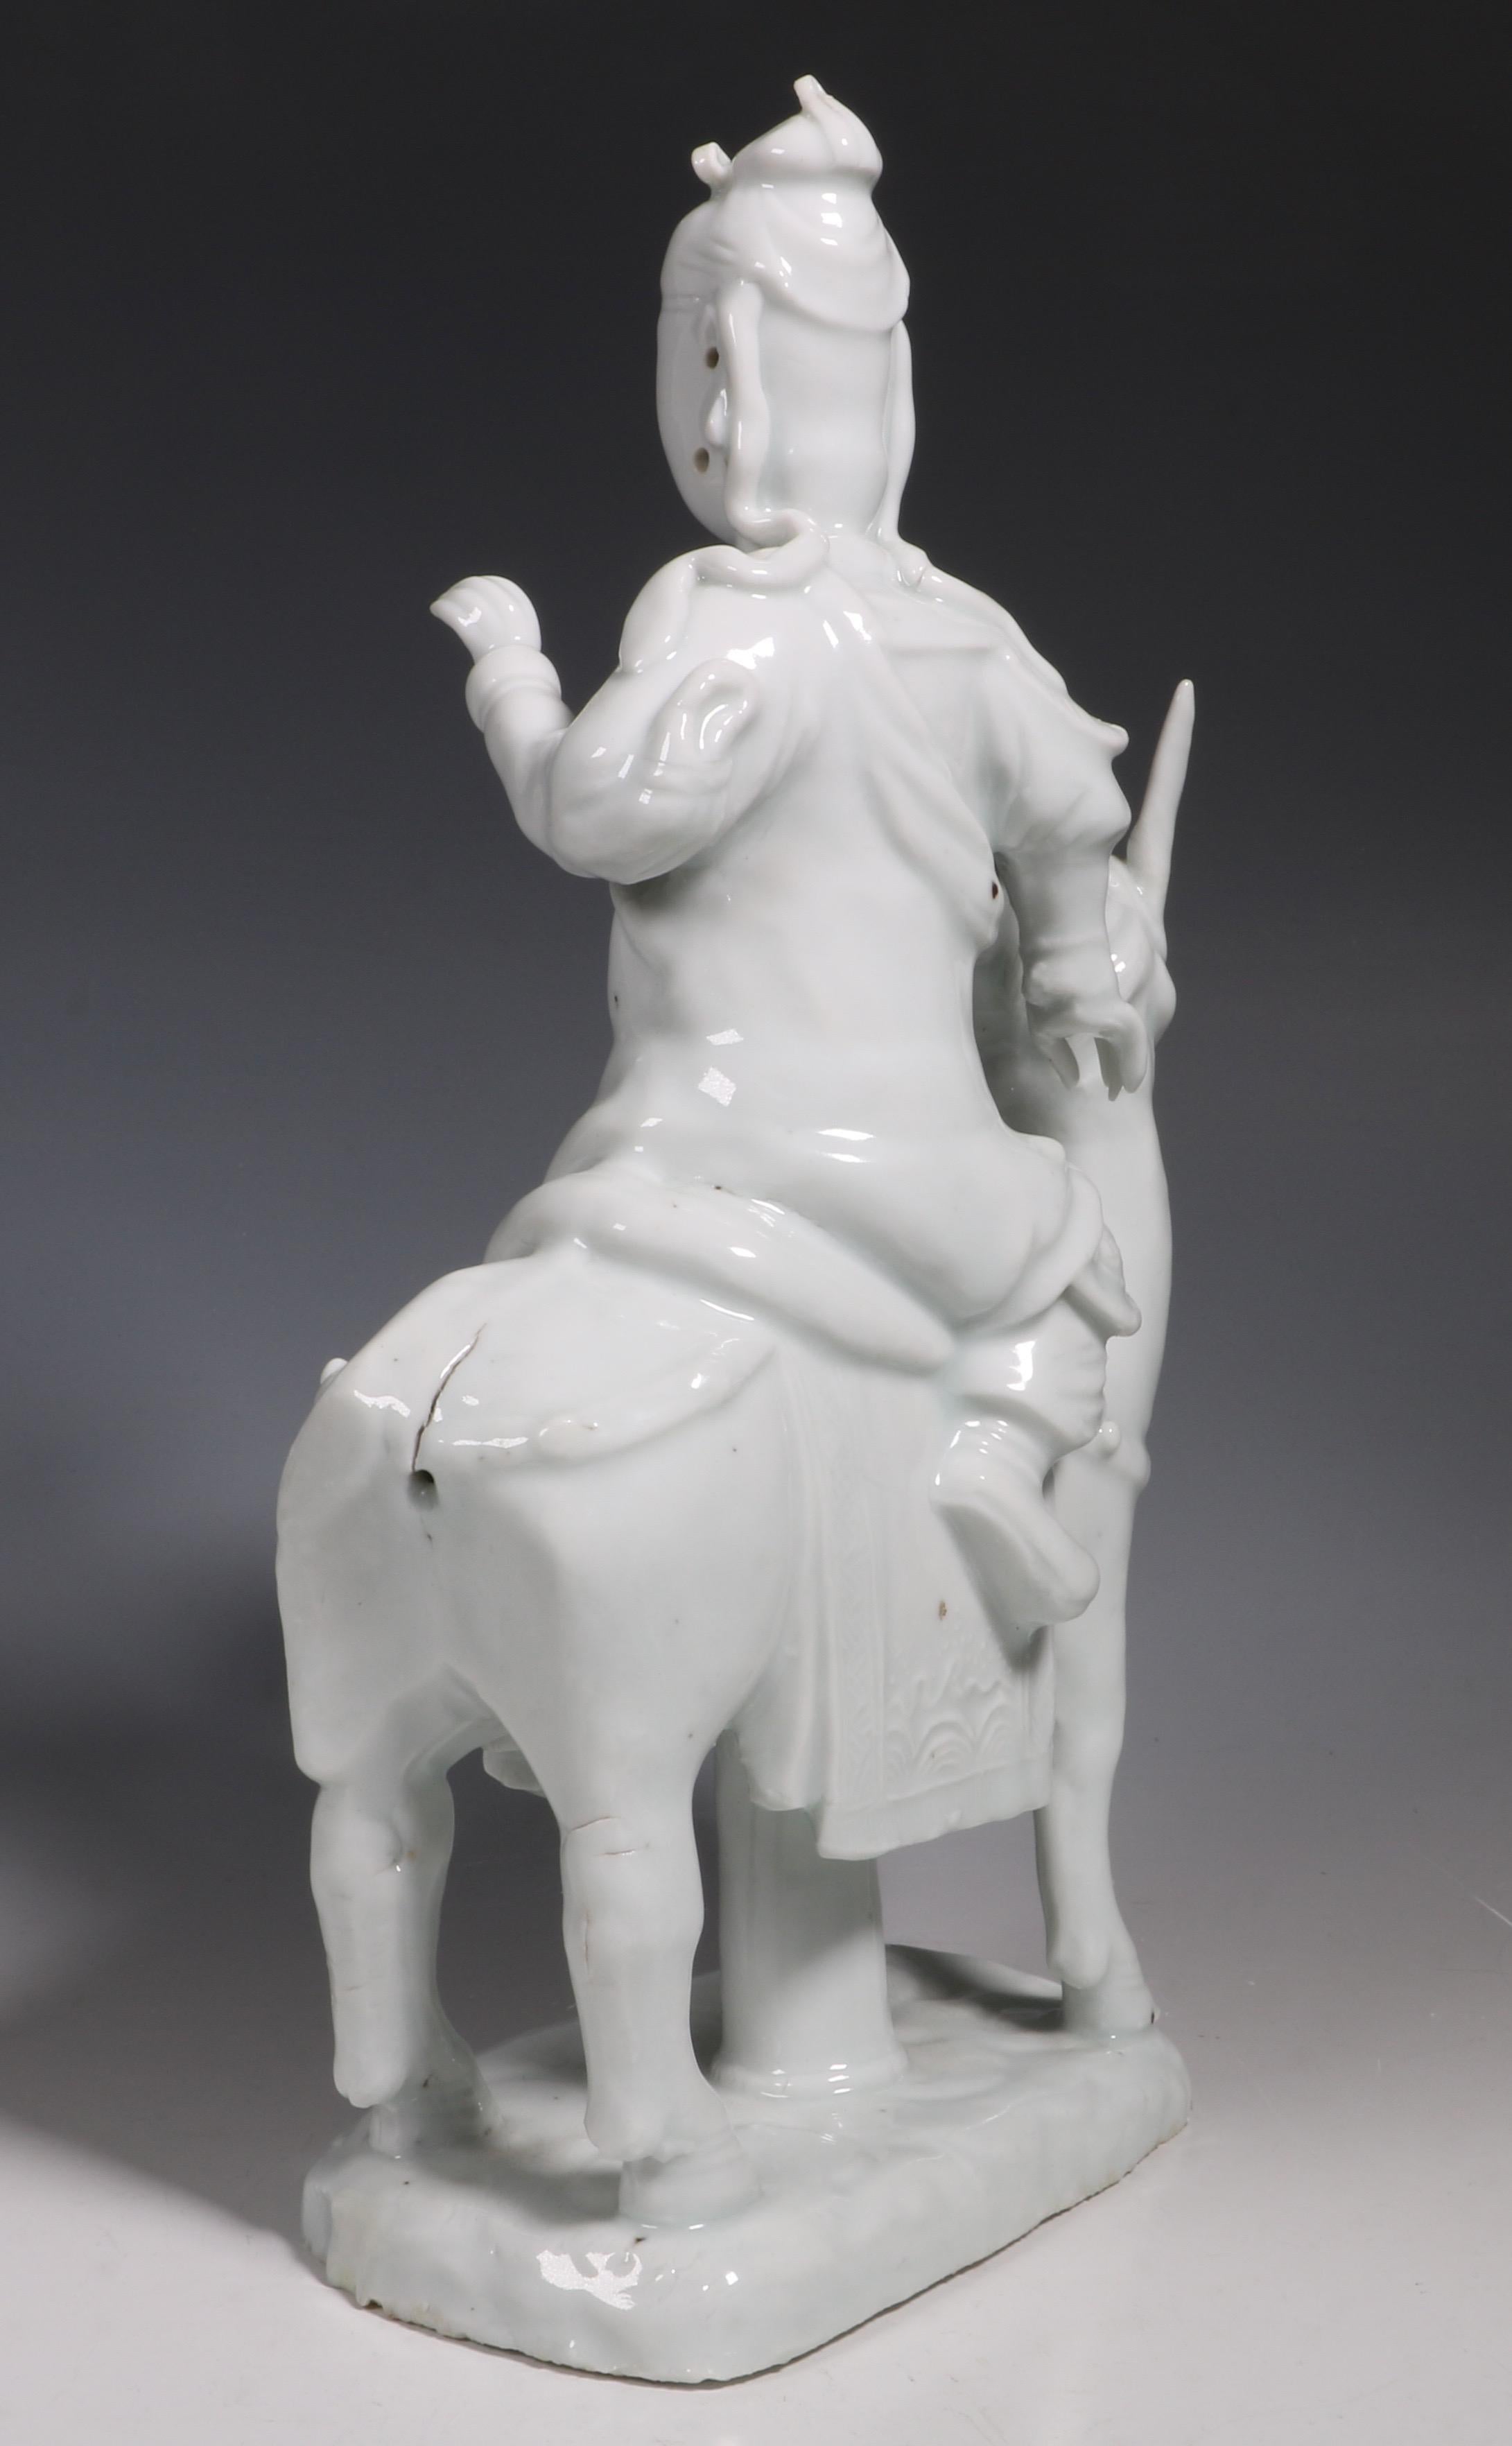 Chinese Porcelain Blanc de Chine Figure of Guandi Kangxi, Late 17th Century For Sale 2